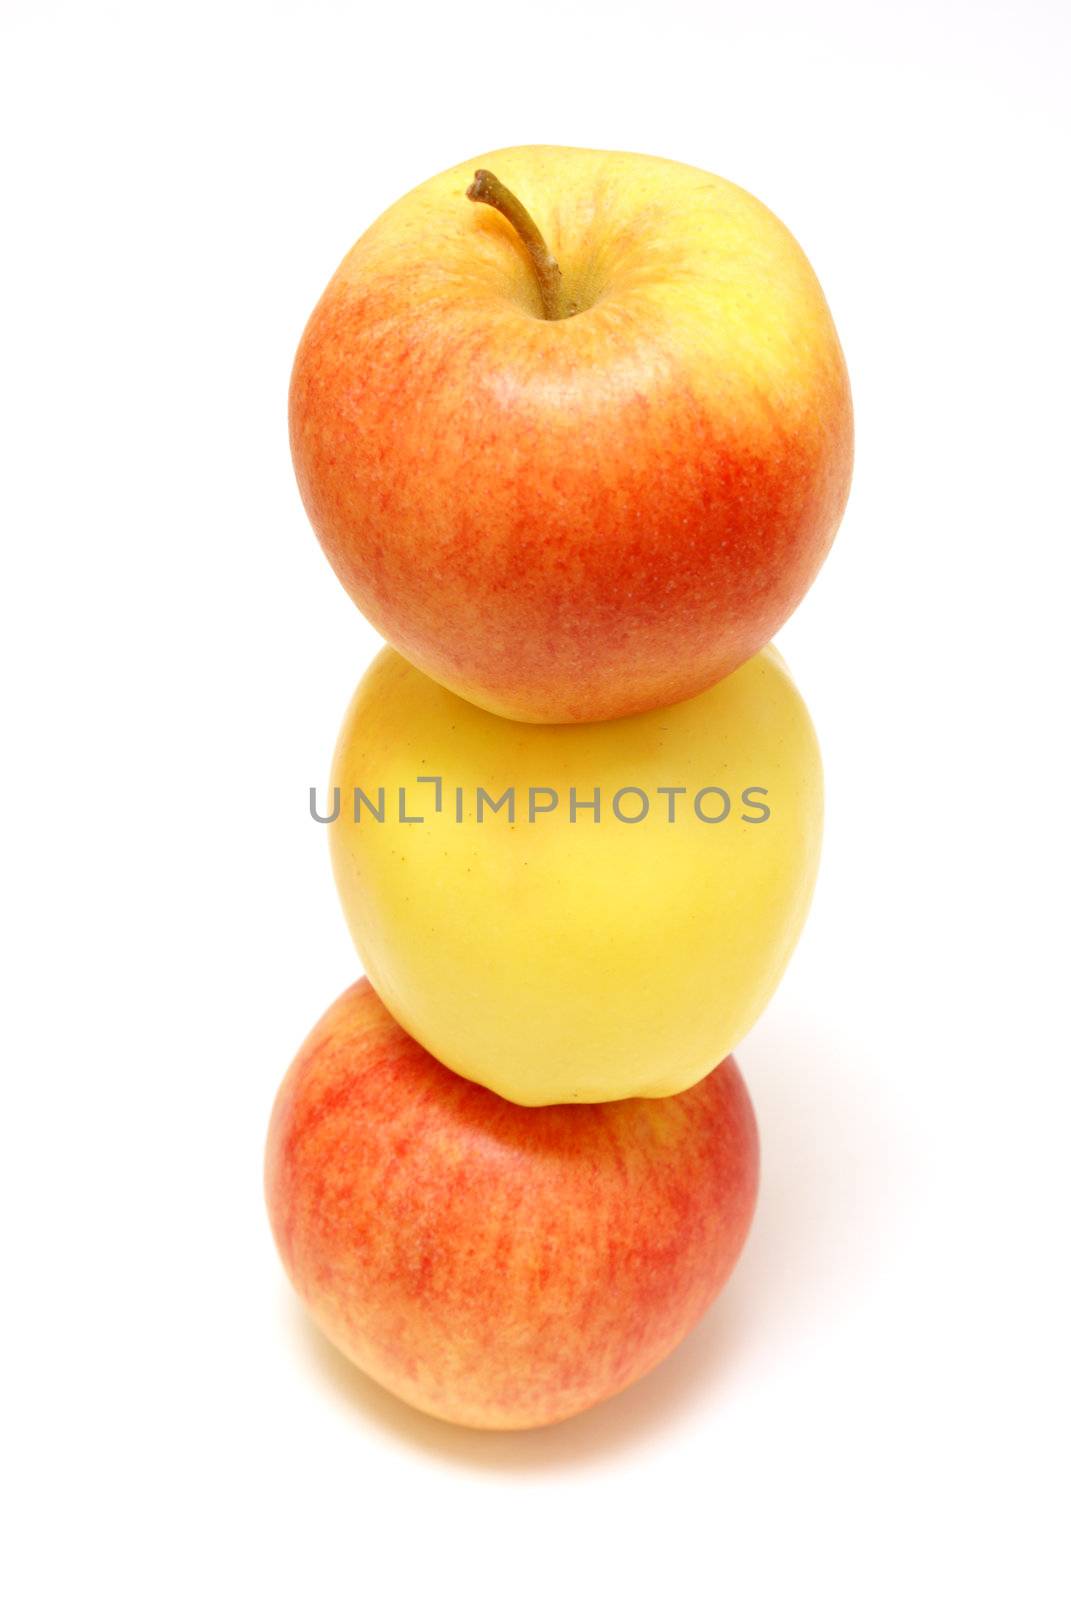 A yellow apple is stuck in the middle of two red ones.